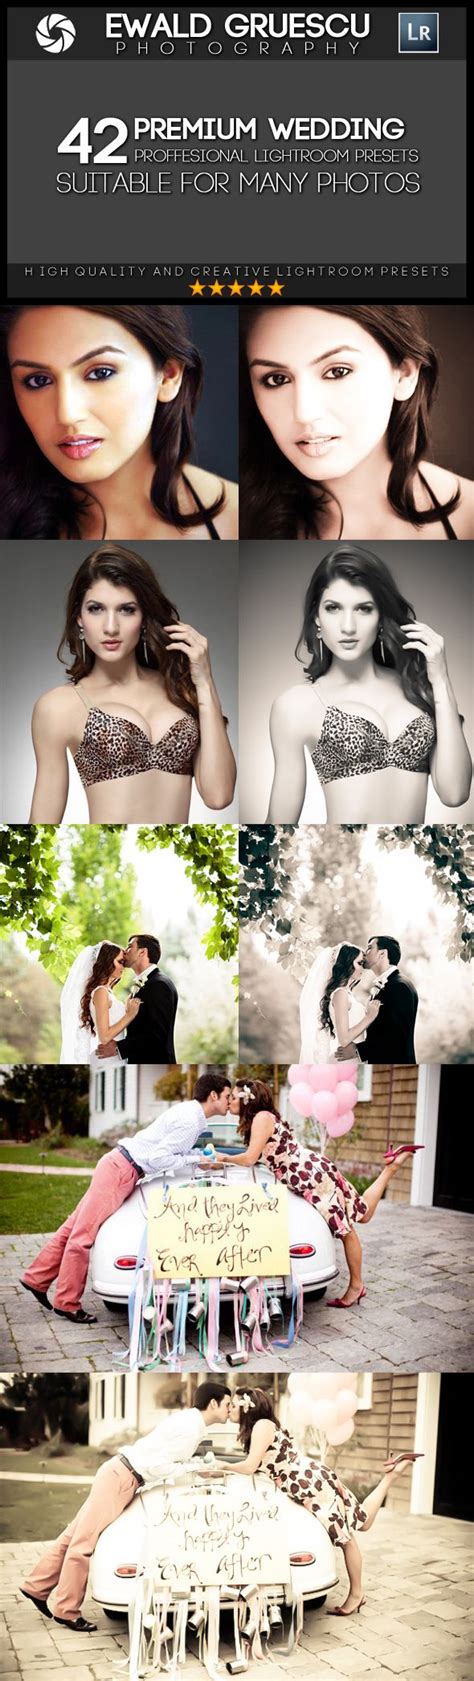 Whether you are looking for free presets for portraits, weddings, newborns, mobile, or anything else, you'll find some of the best presets available to help you. 42 Wedding Style Lightroom Presets | Lightroom presets ...